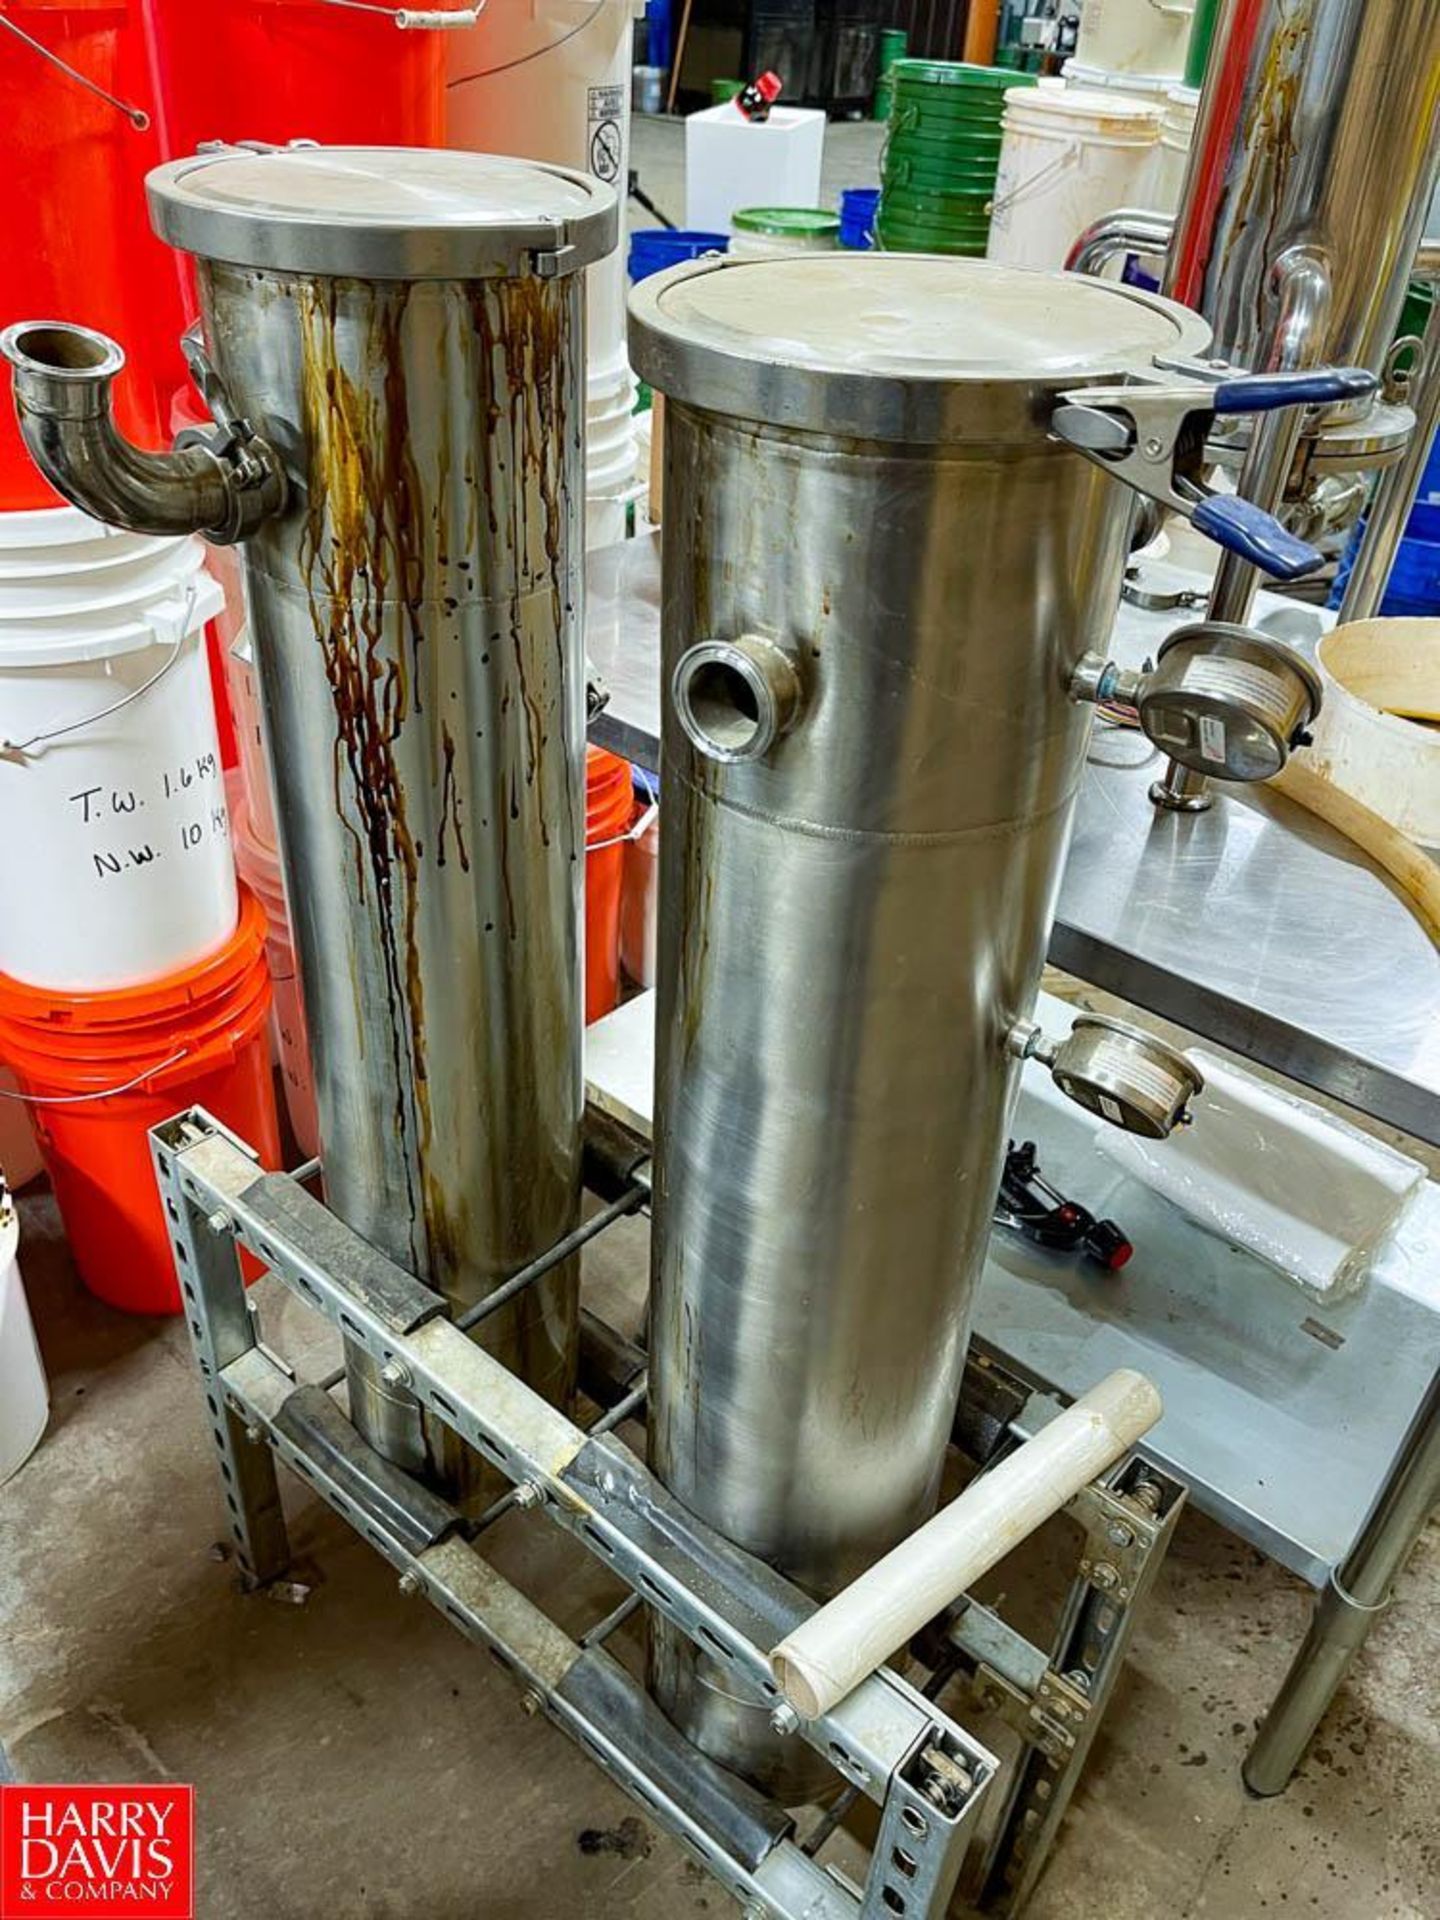 2019 Pinnacle Filtration Skid : S/N 3-001005, Mounted on Portable S/S Frame **Never Installed - Image 4 of 4